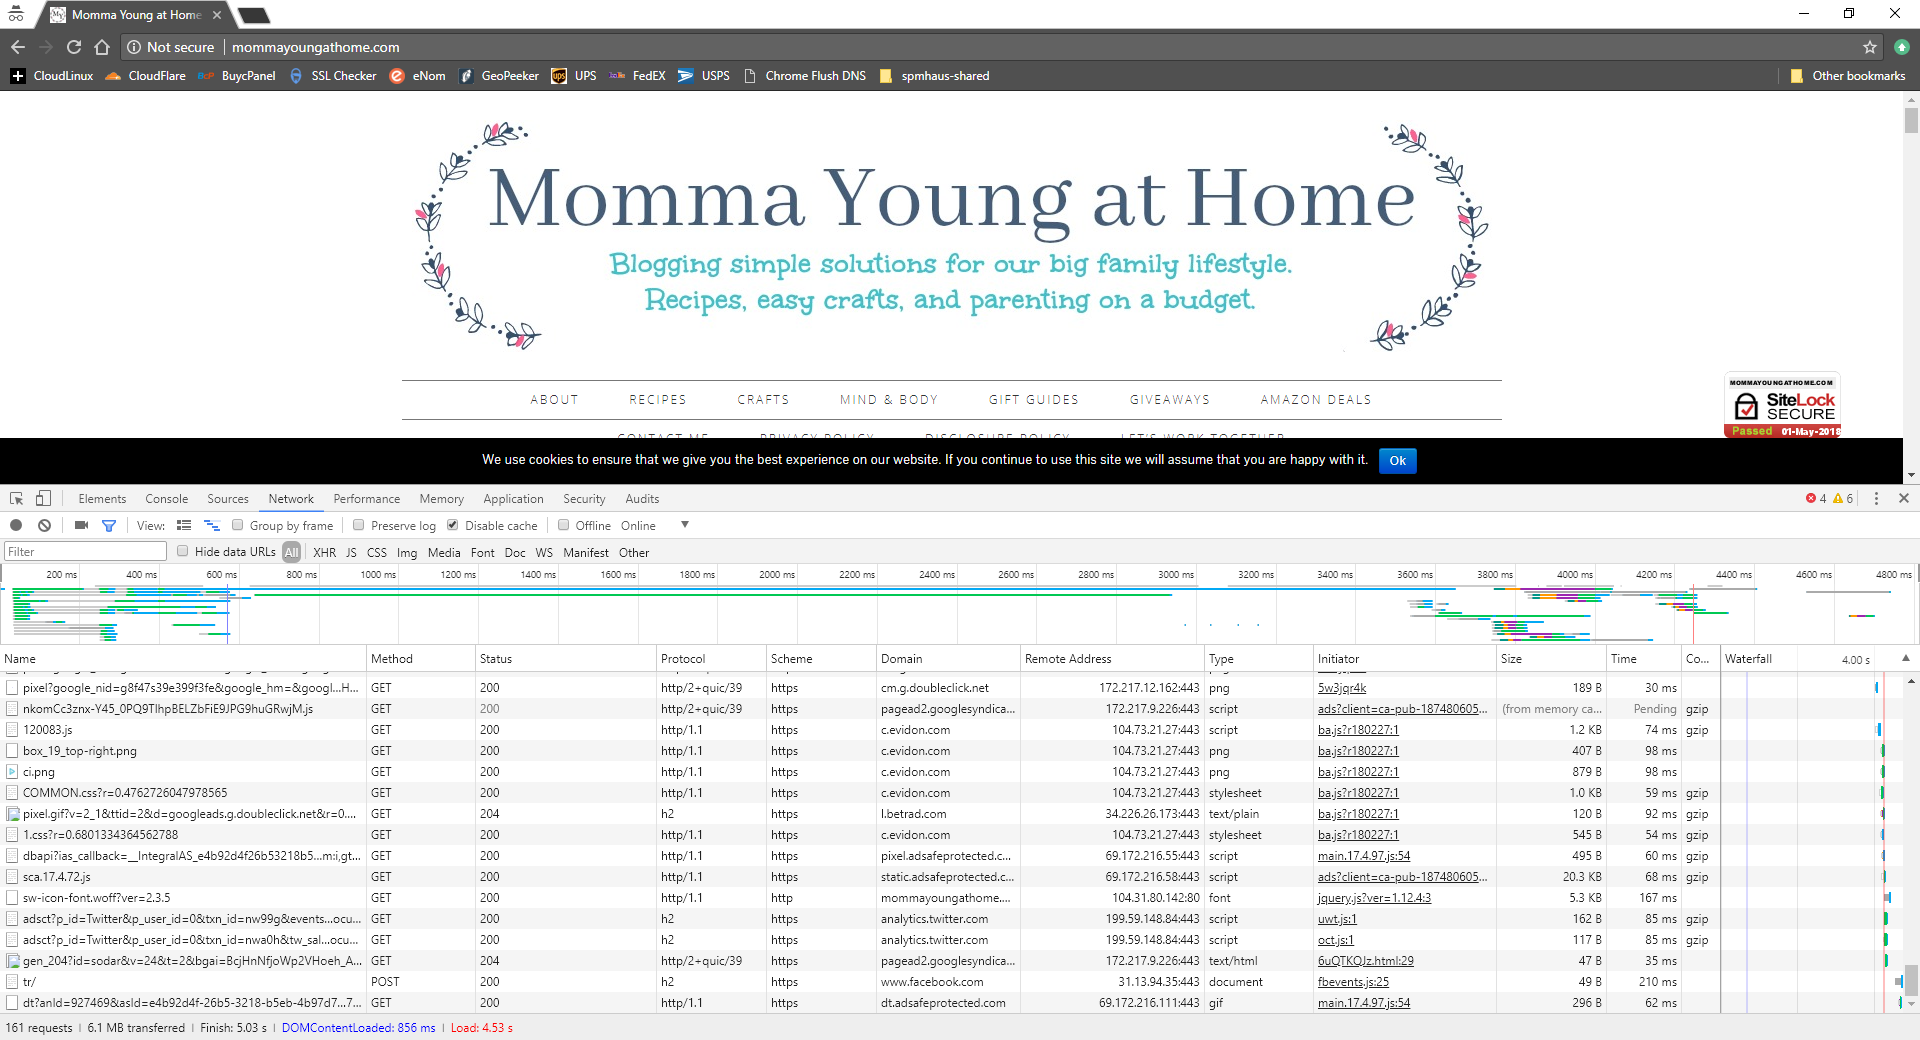 www.mommayoungathome.com Speed Comparison Before